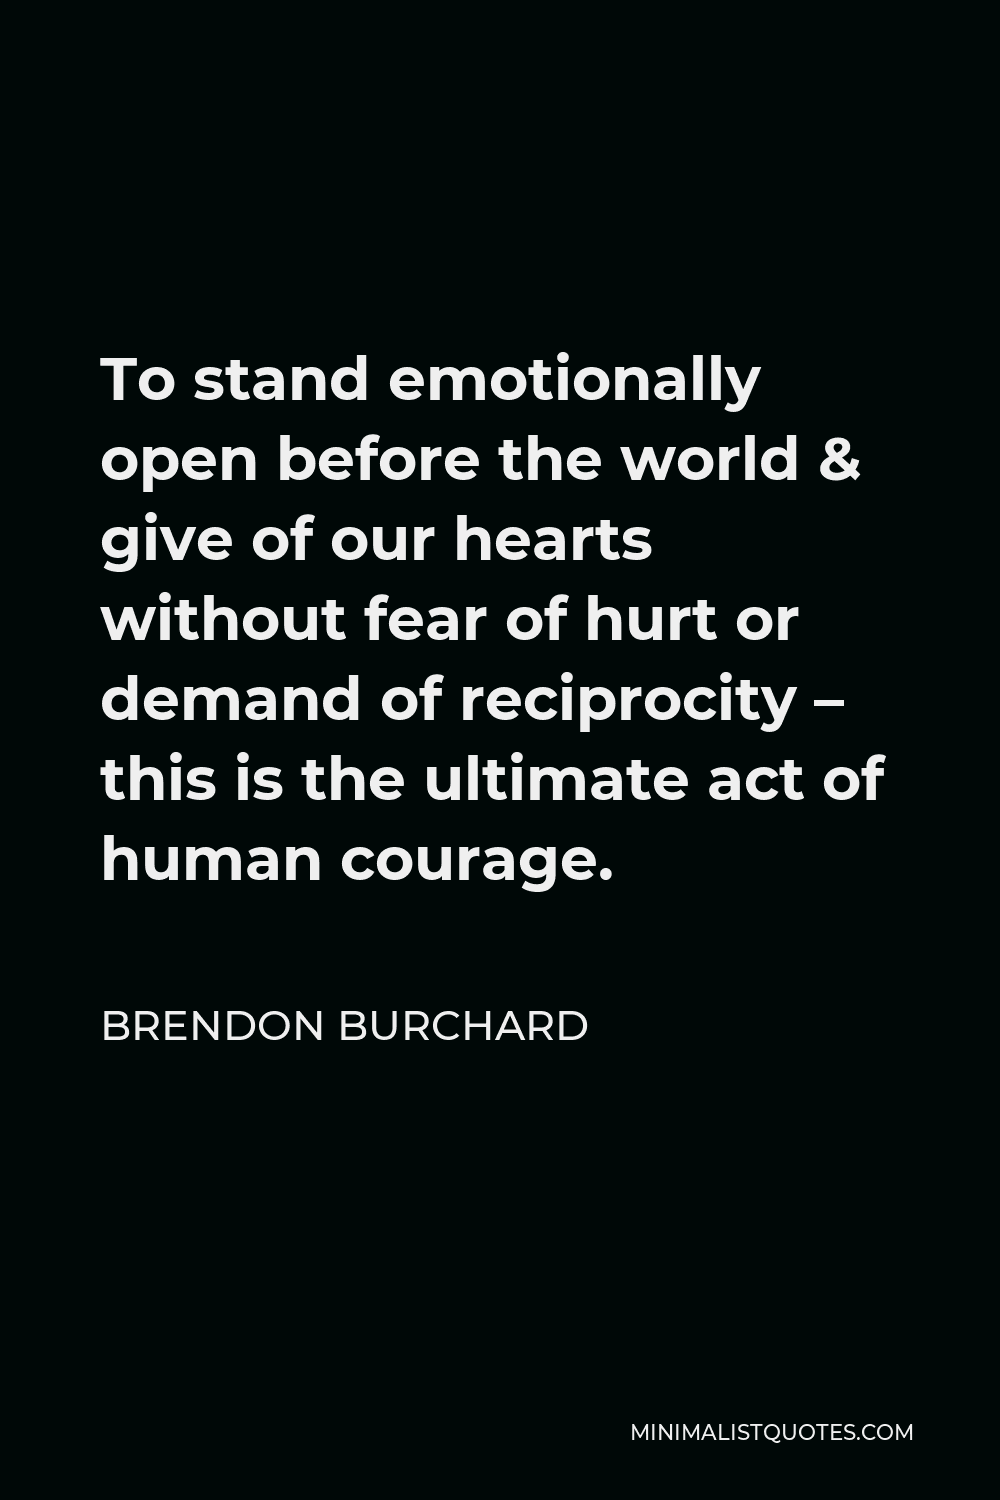 Brendon Burchard Quote - To stand emotionally open before the world & give of our hearts without fear of hurt or demand of reciprocity – this is the ultimate act of human courage.